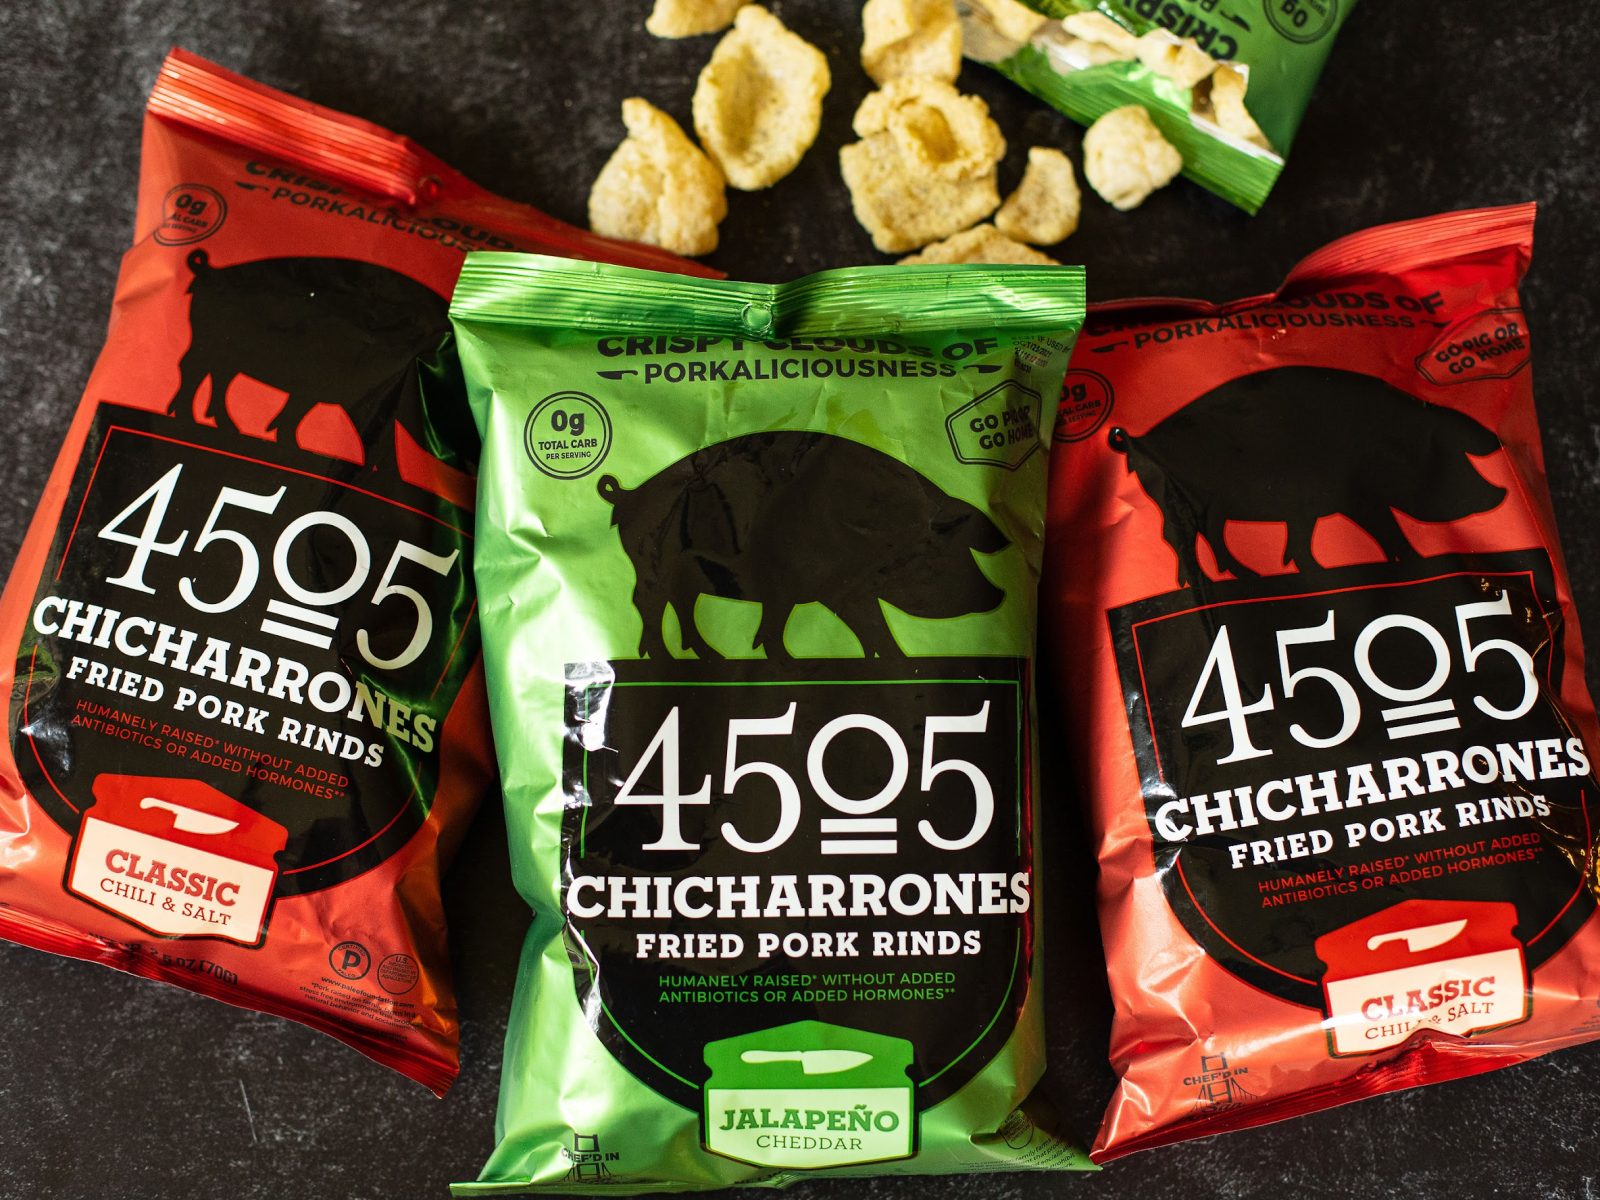 4505 Chicharrones Are Now Available At Publix – Three Winners Get A $50 Publix Gift Card & Lots Of FREE 4505 Chicharrones!